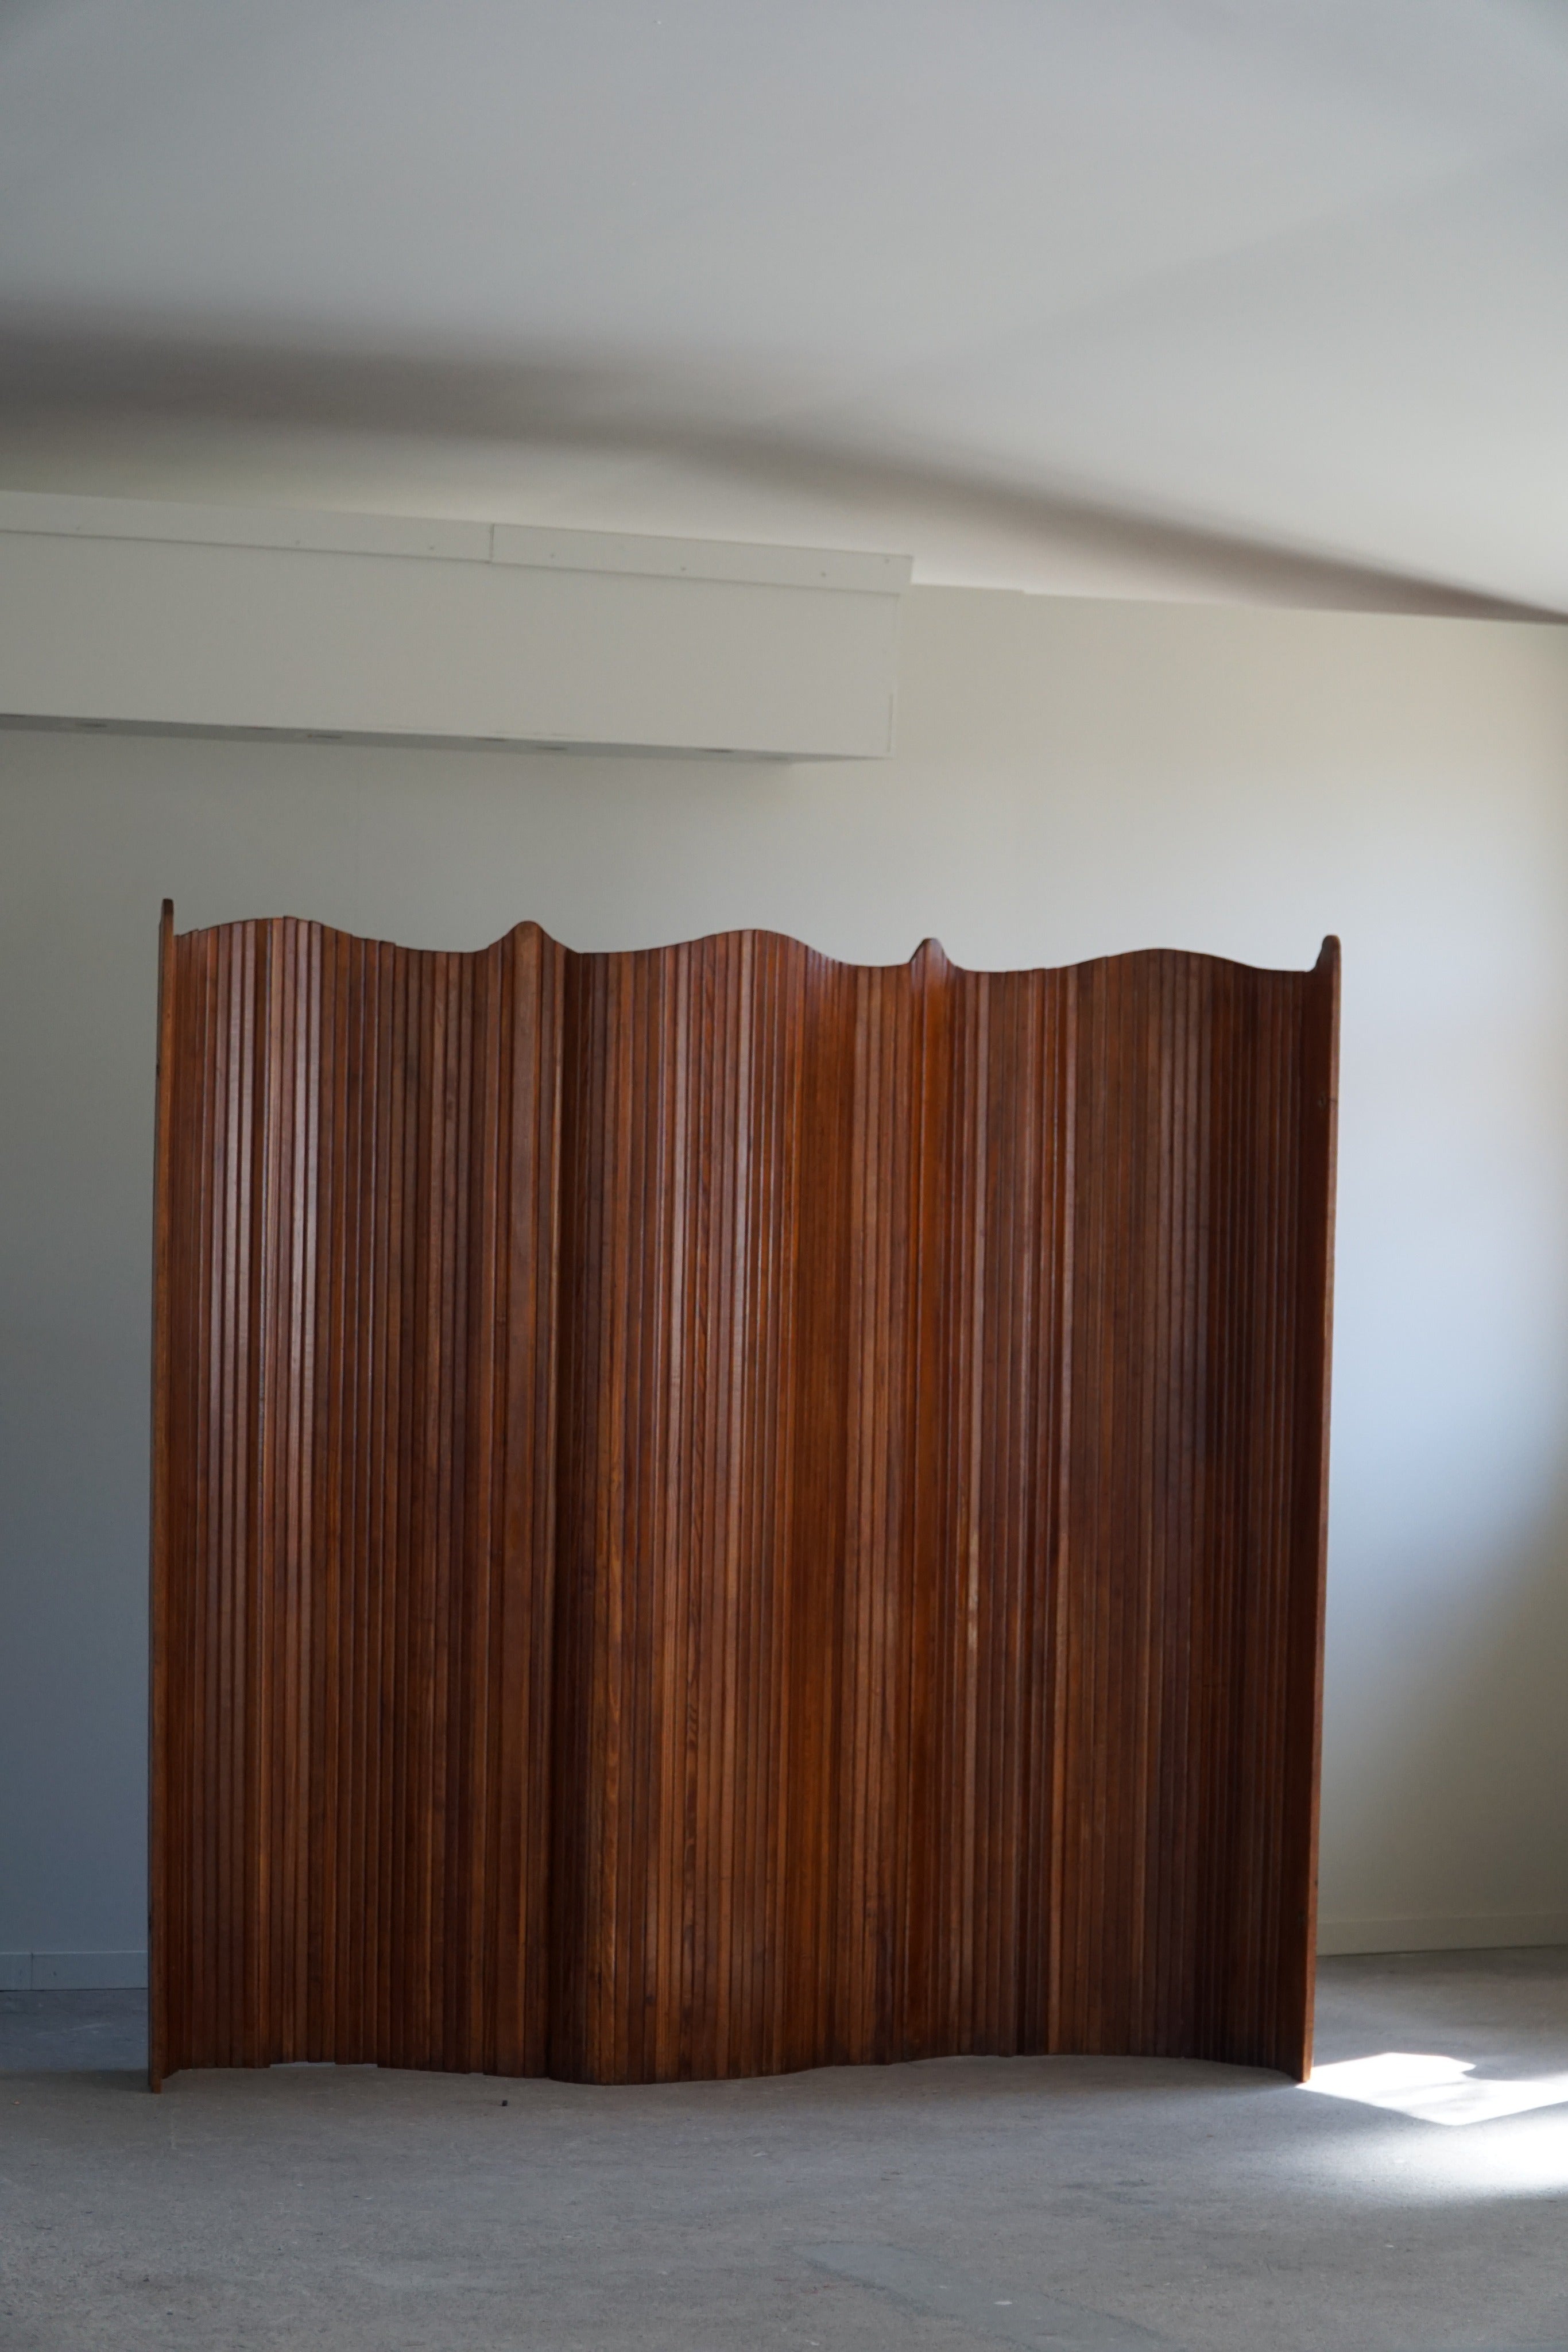 French Art Deco Tambour Room Divider in Pine, Attributed Jomaine Baumann, 1930s